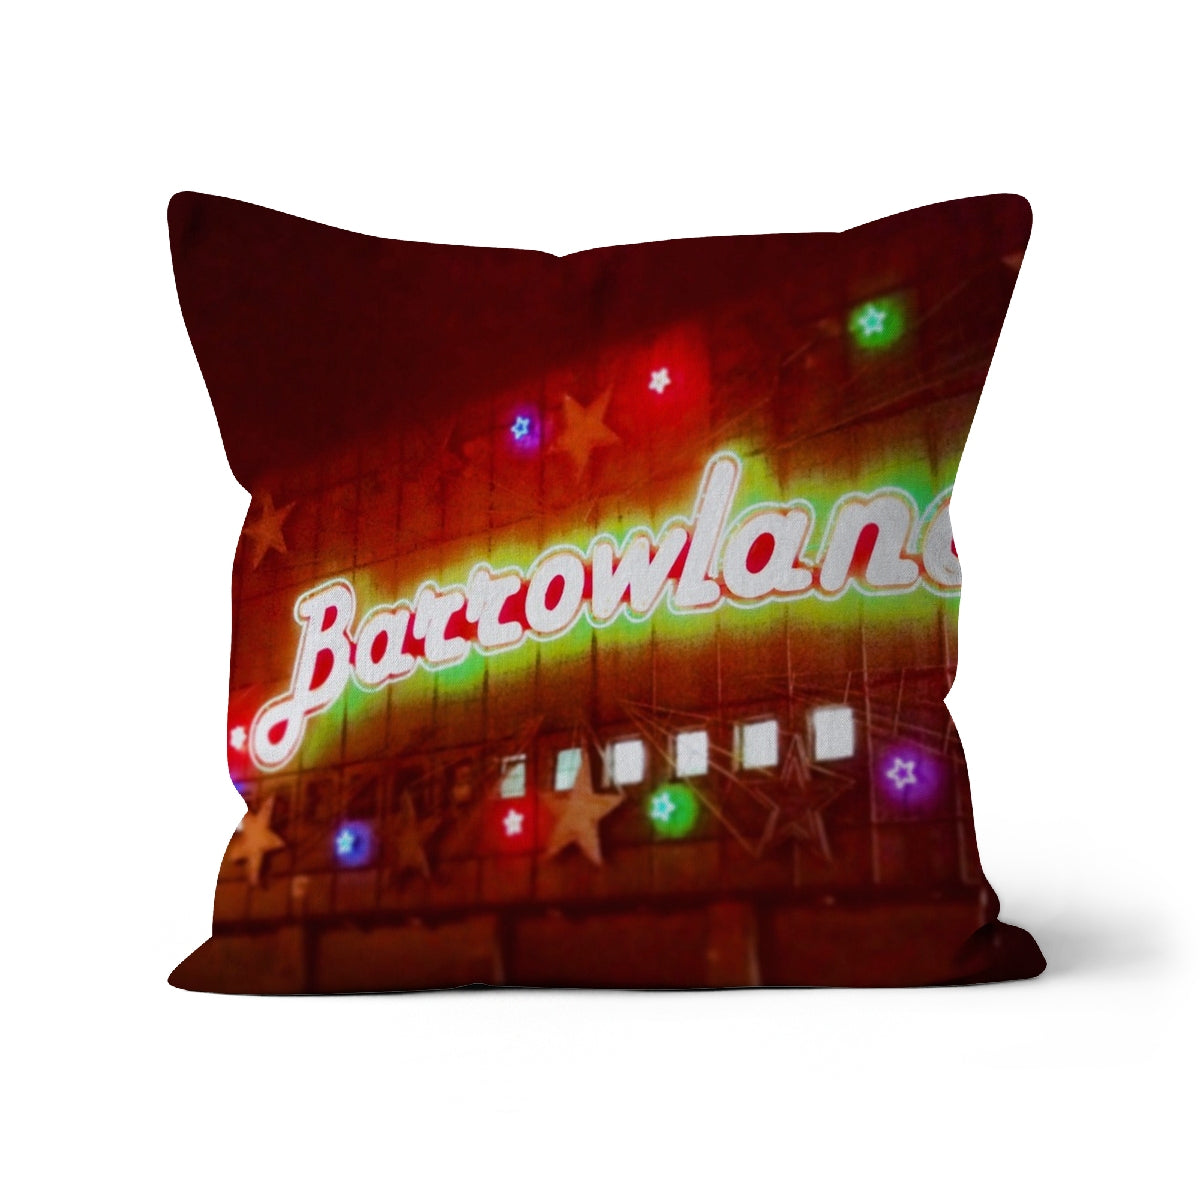 A Neon Glasgow Barrowlands Art Gifts Cushion-Cushions-Edinburgh & Glasgow Art Gallery-Faux Suede-22"x22"-Paintings, Prints, Homeware, Art Gifts From Scotland By Scottish Artist Kevin Hunter